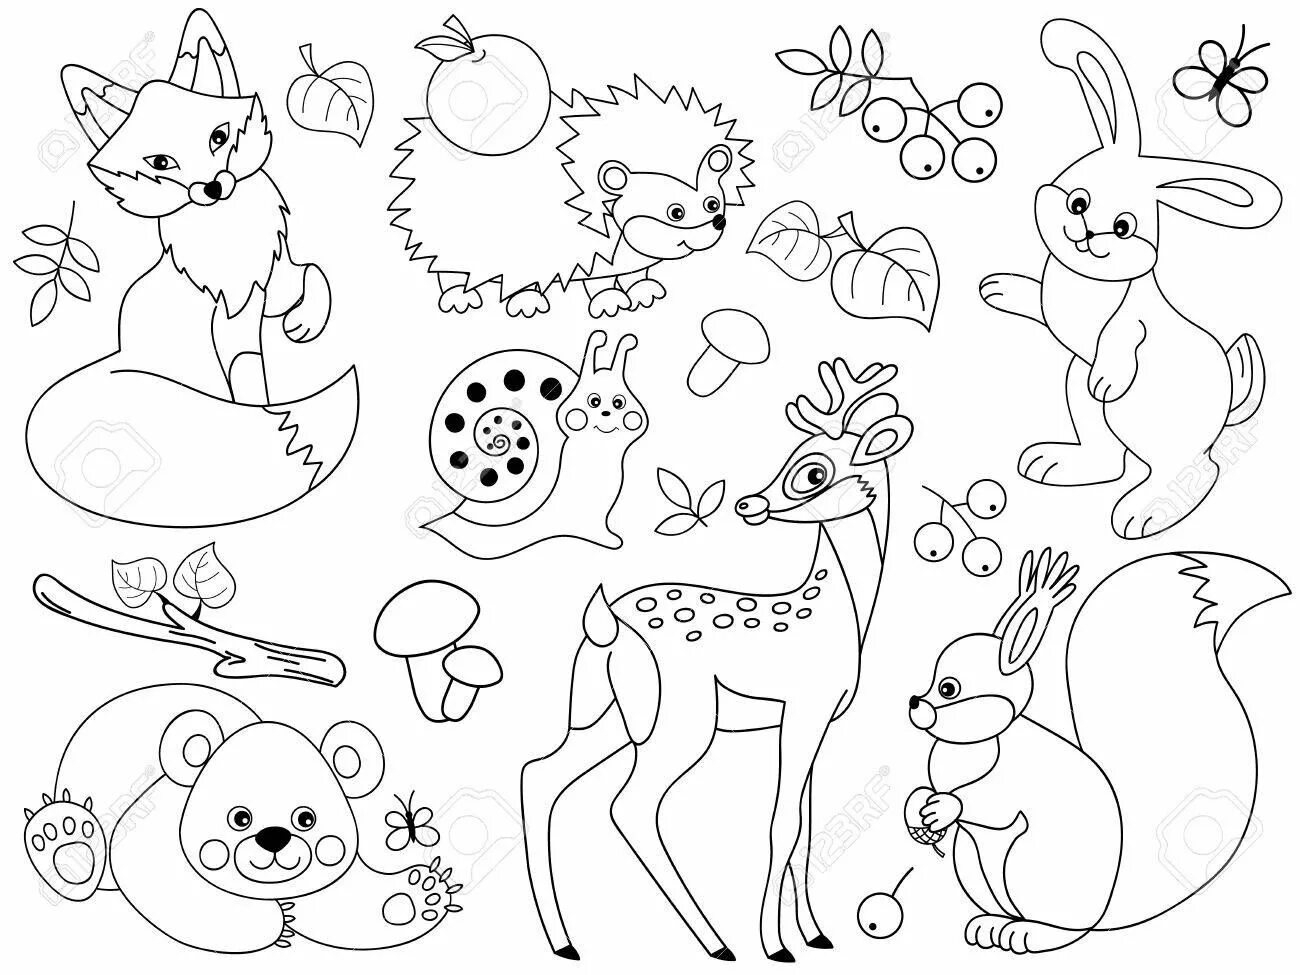 Brilliant forest animal coloring page